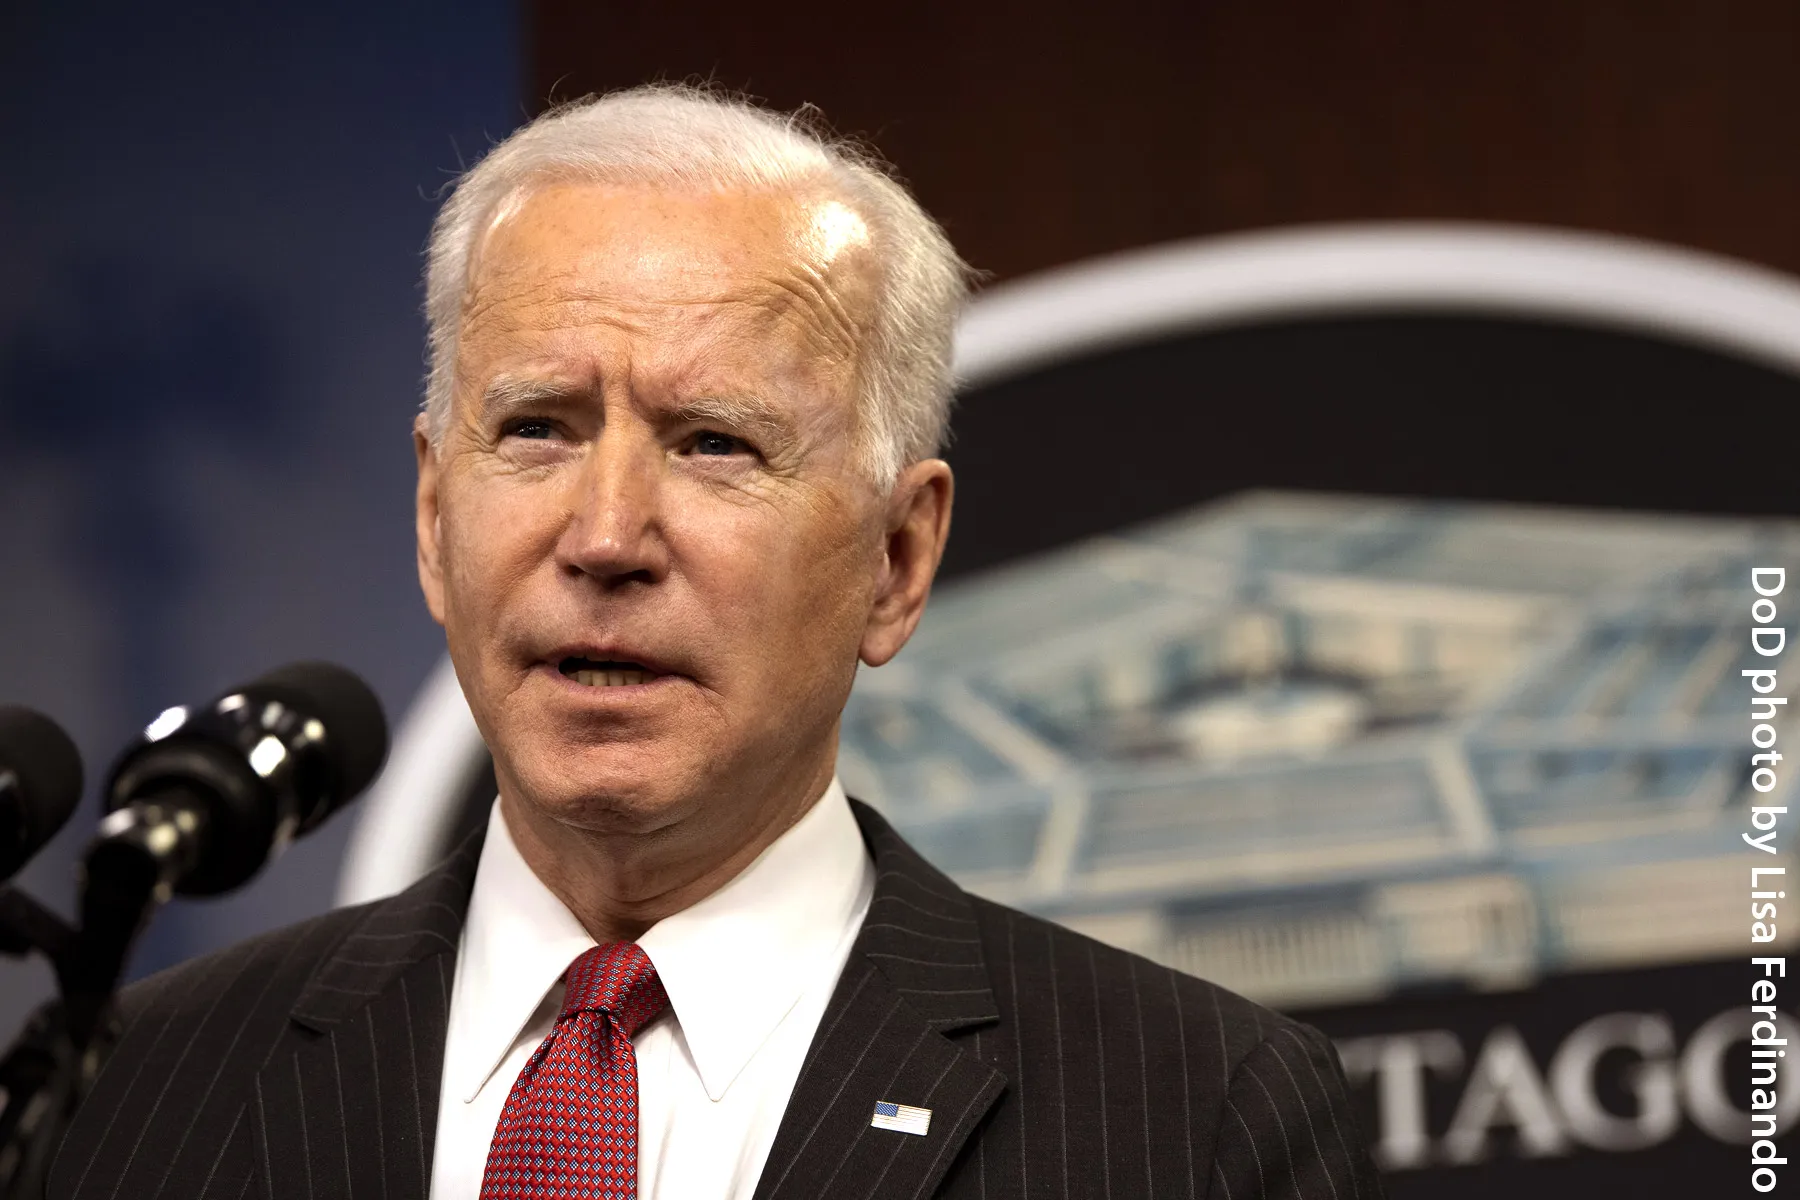 Biden: More Masks, COVID Tests, and Troops to Battle Omicron